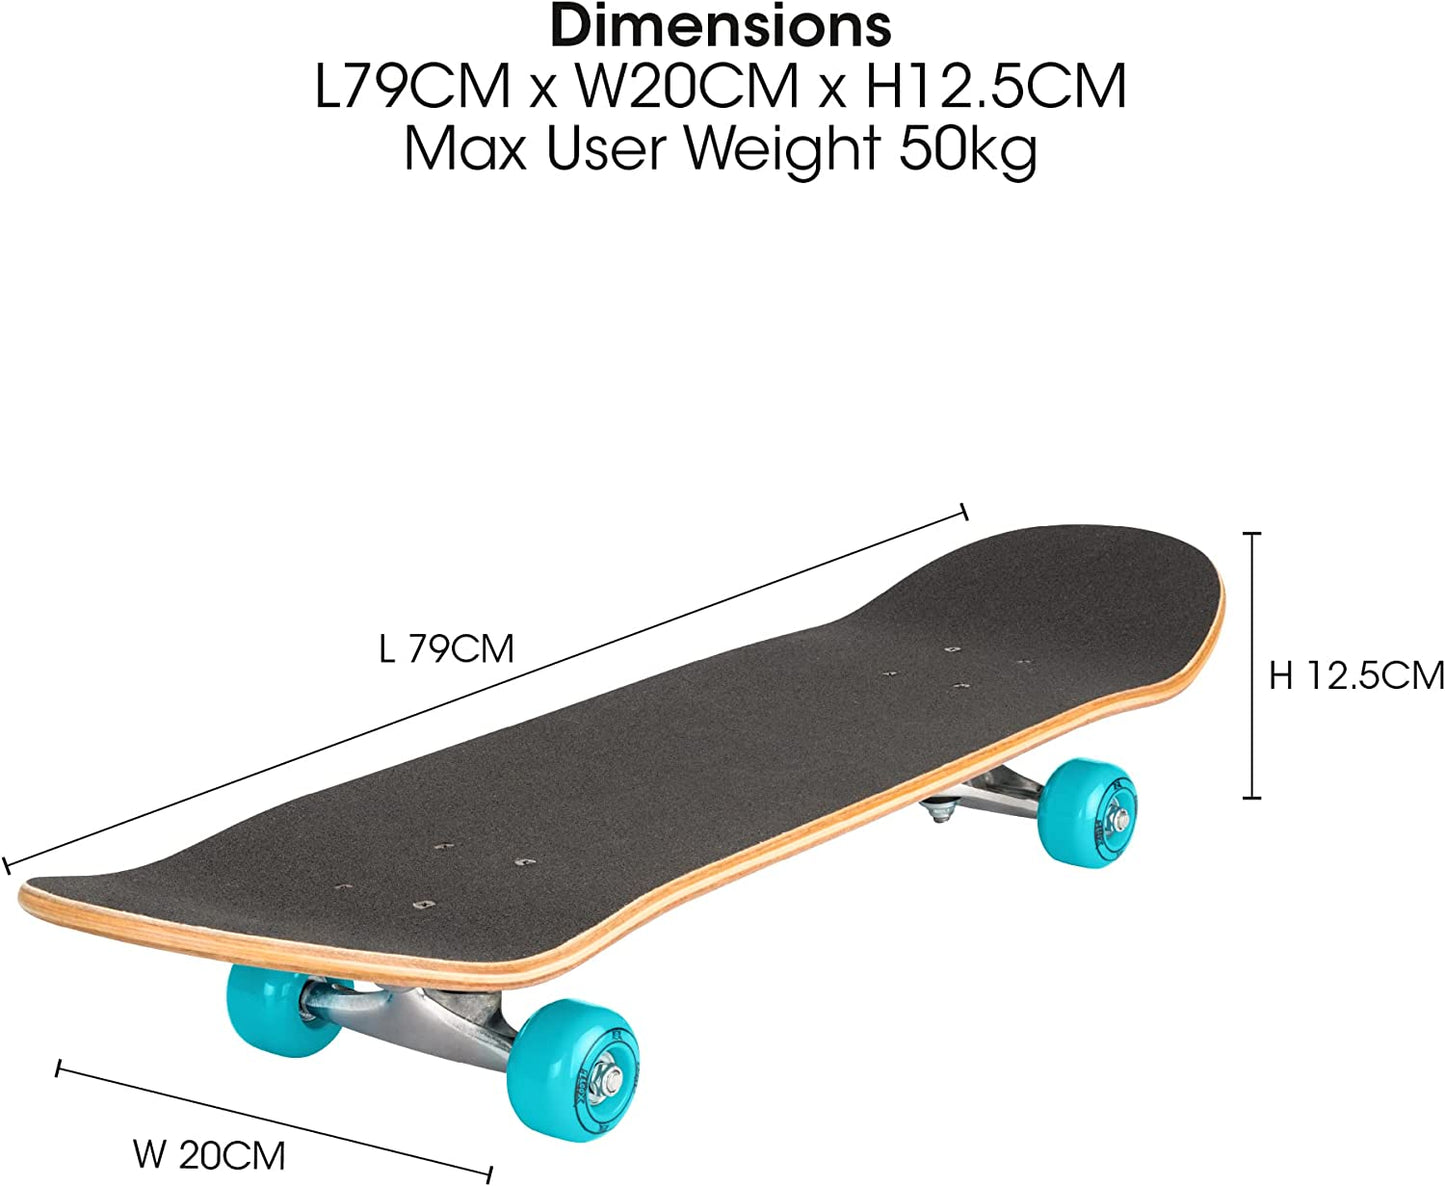 Xootz 31” x 8” Complete Skateboard for Beginners 9 Ply Maple Deck Double Kick Standard Board for Boys and Girls  - Streak